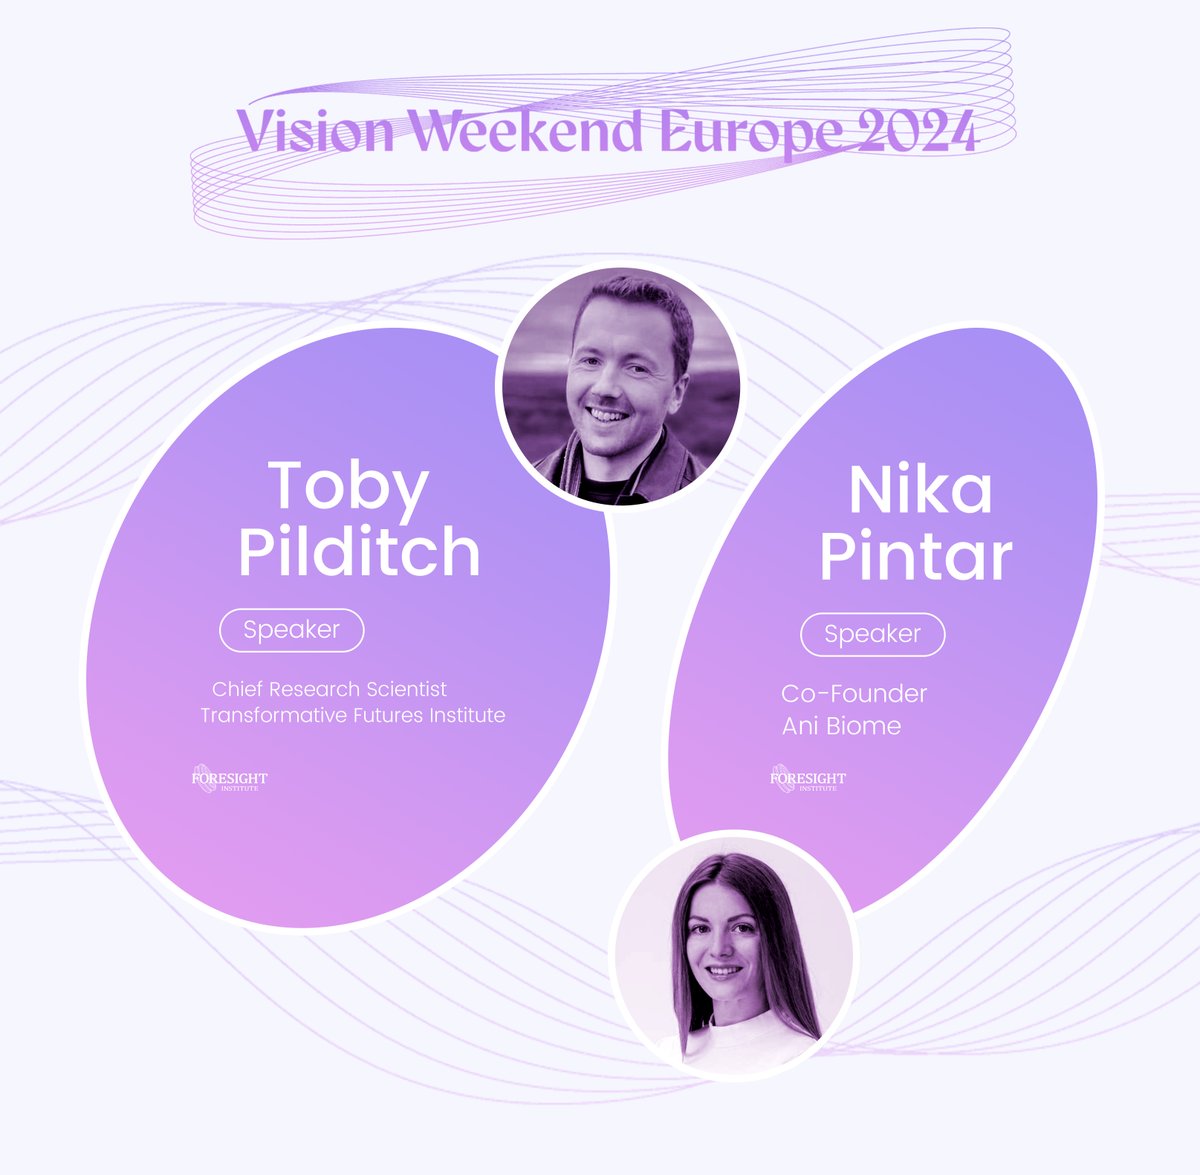 5 hours left to buy Early bird tickets. We have an impressive roster of speakers including Toby Pilditch and Nika Pintar. Join us at Bückeburg Palace, Germany, from July 12-14. Secure your spot today: foresight.org/vw2024eu/